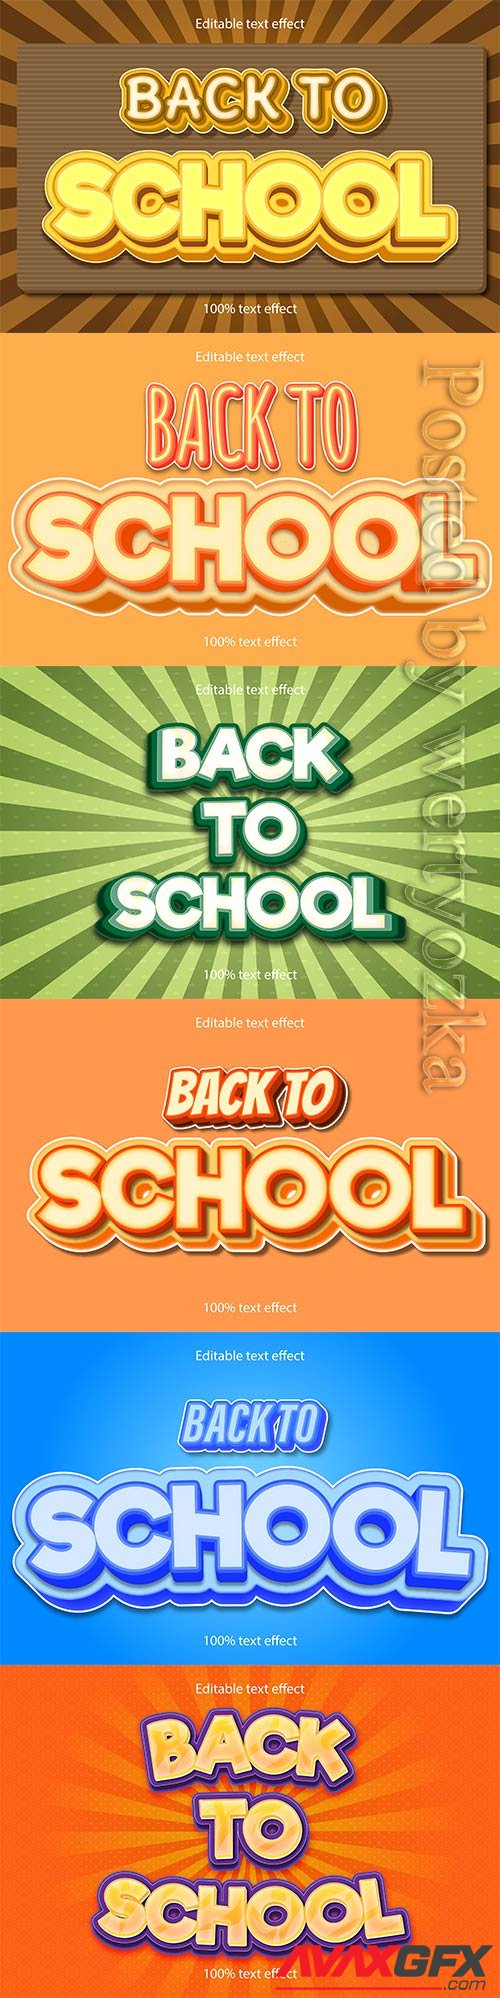 Back to school editable text effect vol 5